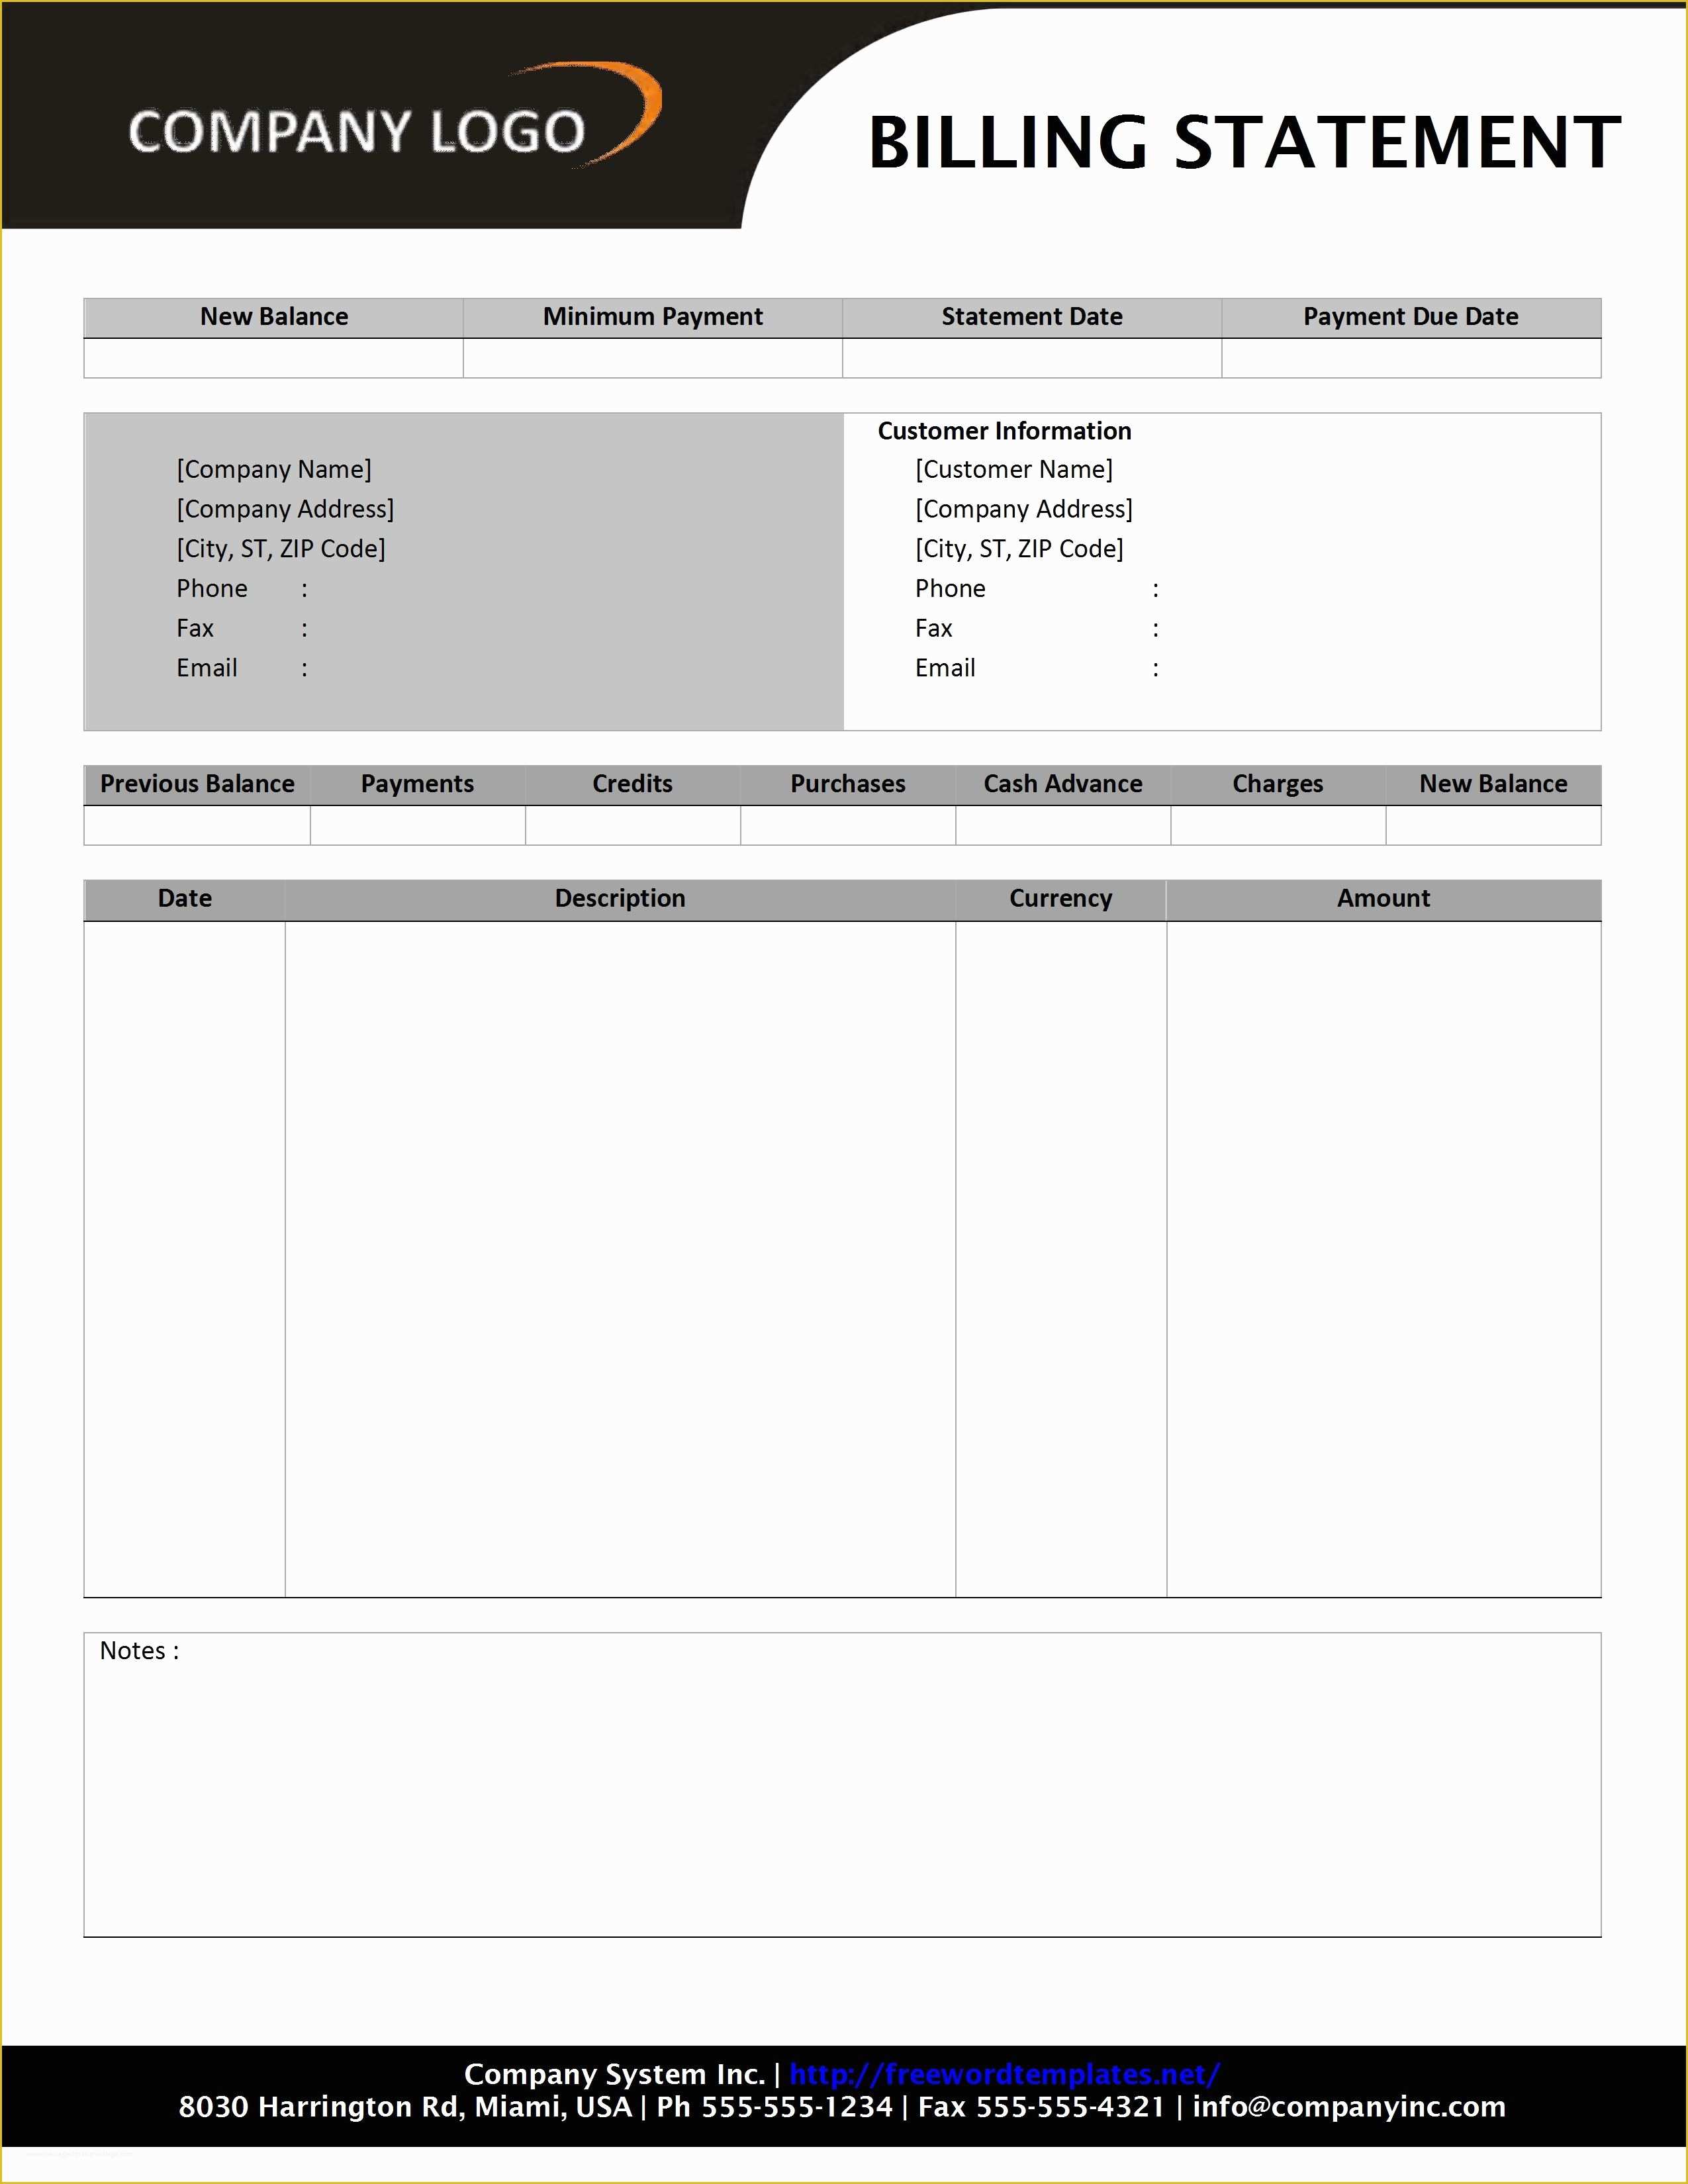 Statement Of Invoices Template Free Of Sample Billing Statement Google Search